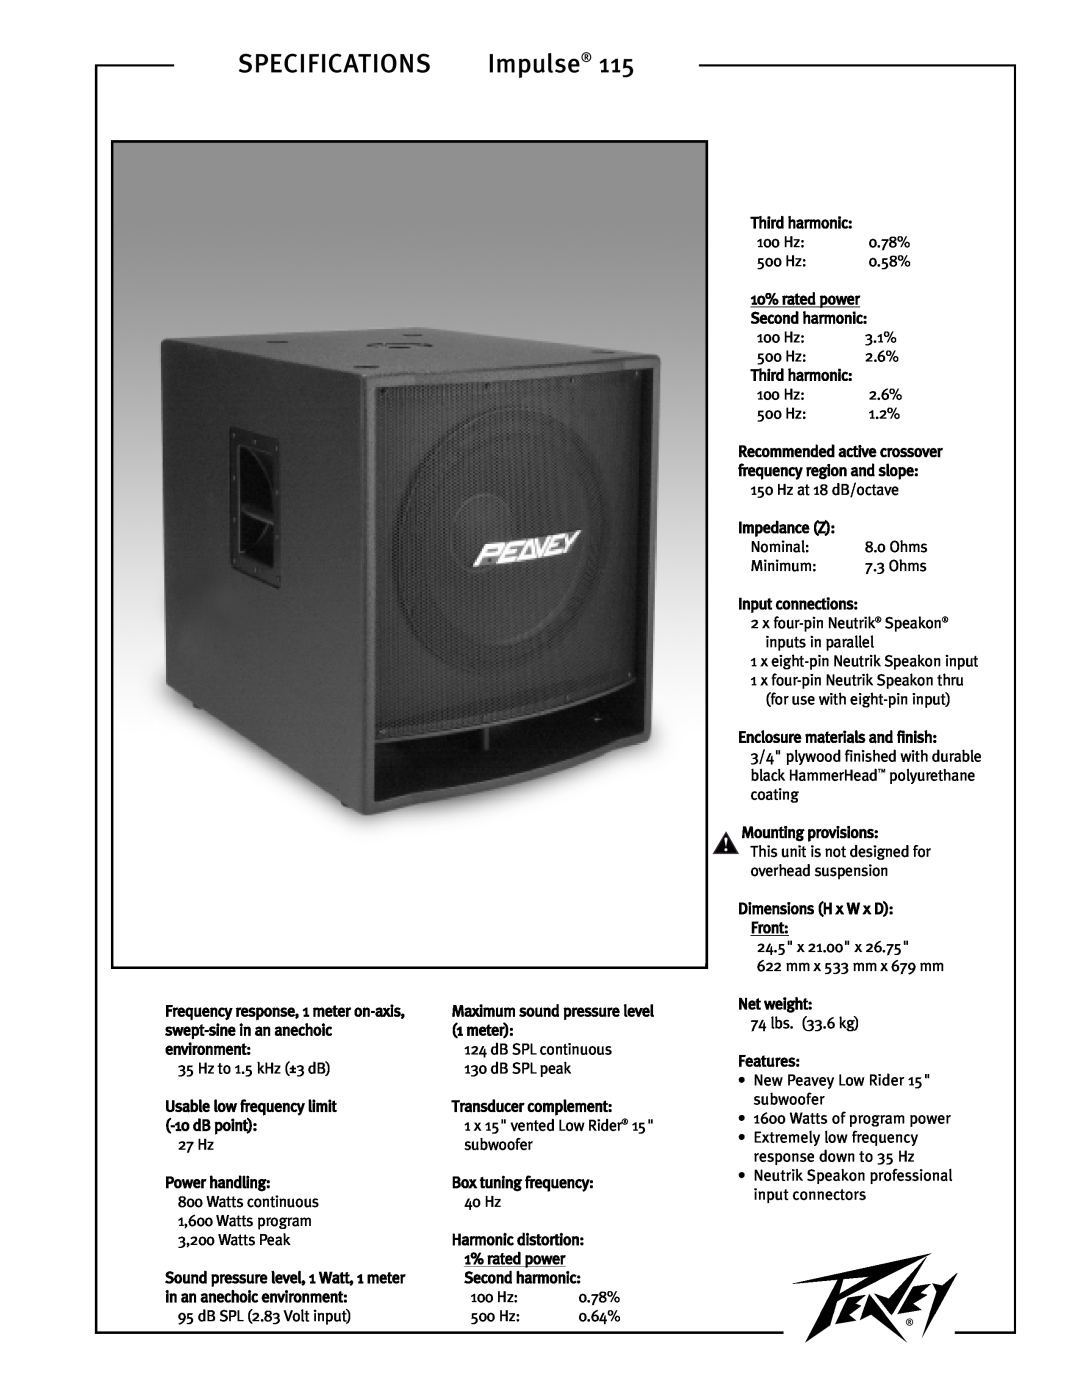 Peavey Impulse 115 specifications Specifications 